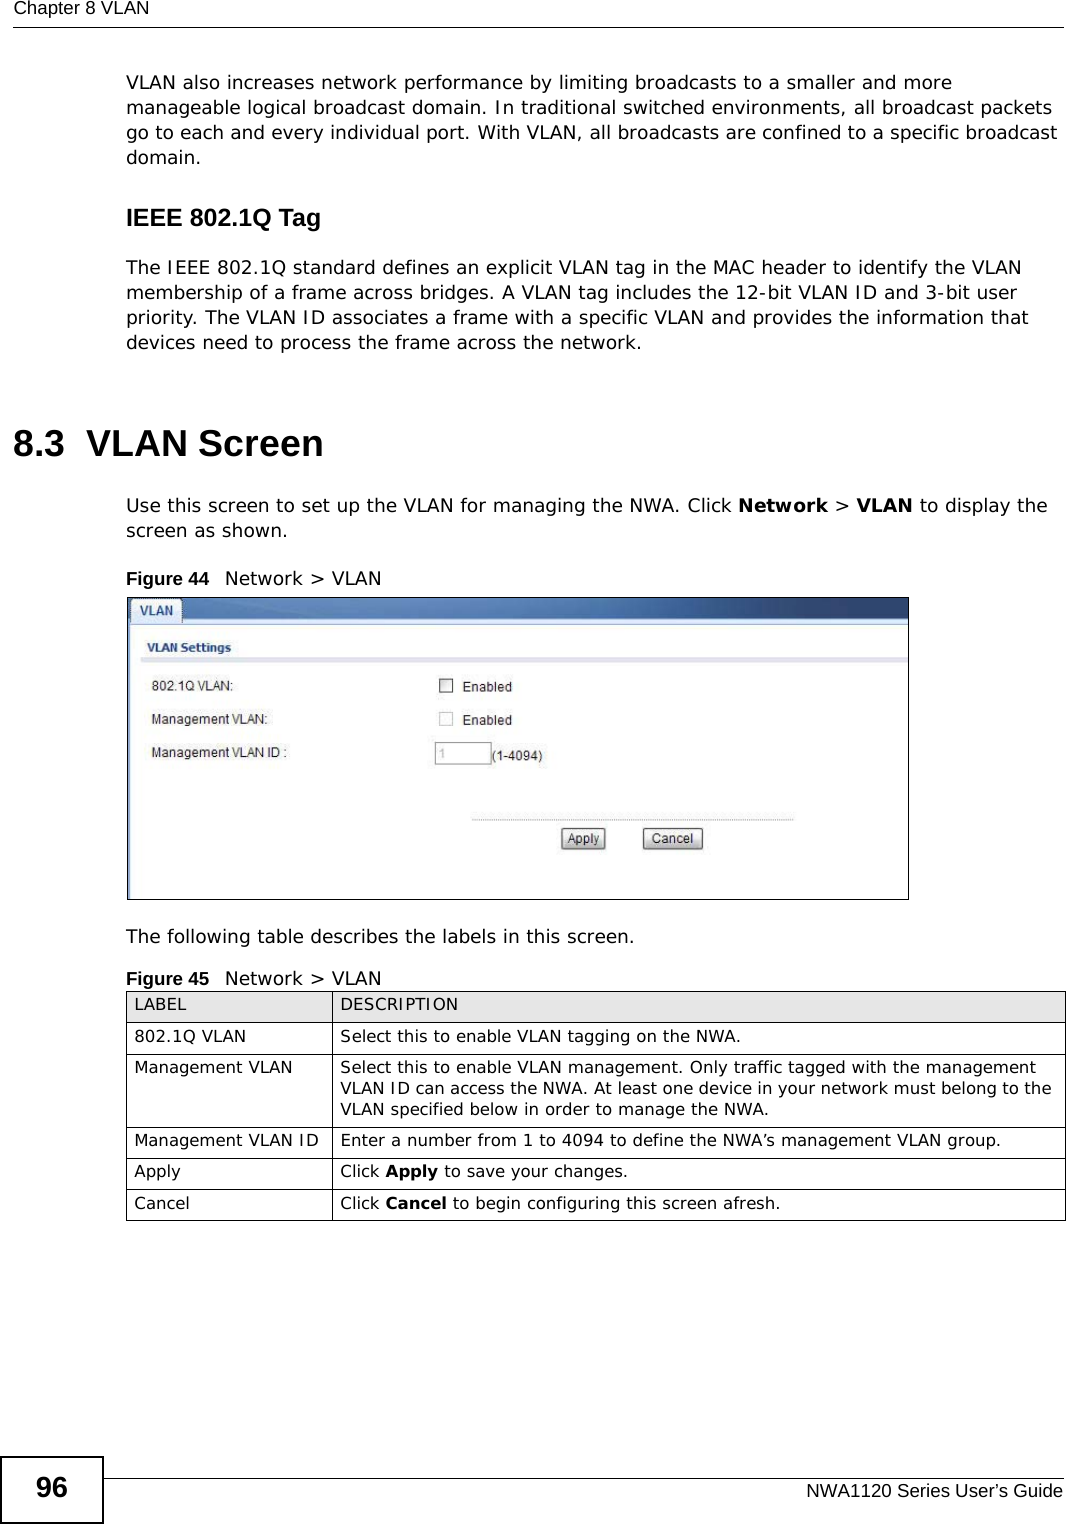 Chapter 8 VLANNWA1120 Series User’s Guide96VLAN also increases network performance by limiting broadcasts to a smaller and more manageable logical broadcast domain. In traditional switched environments, all broadcast packets go to each and every individual port. With VLAN, all broadcasts are confined to a specific broadcast domain. IEEE 802.1Q TagThe IEEE 802.1Q standard defines an explicit VLAN tag in the MAC header to identify the VLAN membership of a frame across bridges. A VLAN tag includes the 12-bit VLAN ID and 3-bit user priority. The VLAN ID associates a frame with a specific VLAN and provides the information that devices need to process the frame across the network. 8.3  VLAN ScreenUse this screen to set up the VLAN for managing the NWA. Click Network &gt; VLAN to display the screen as shown.Figure 44   Network &gt; VLANThe following table describes the labels in this screen.Figure 45   Network &gt; VLANLABEL DESCRIPTION802.1Q VLAN  Select this to enable VLAN tagging on the NWA.Management VLAN Select this to enable VLAN management. Only traffic tagged with the management VLAN ID can access the NWA. At least one device in your network must belong to the VLAN specified below in order to manage the NWA.Management VLAN ID Enter a number from 1 to 4094 to define the NWA’s management VLAN group. Apply Click Apply to save your changes.Cancel Click Cancel to begin configuring this screen afresh.